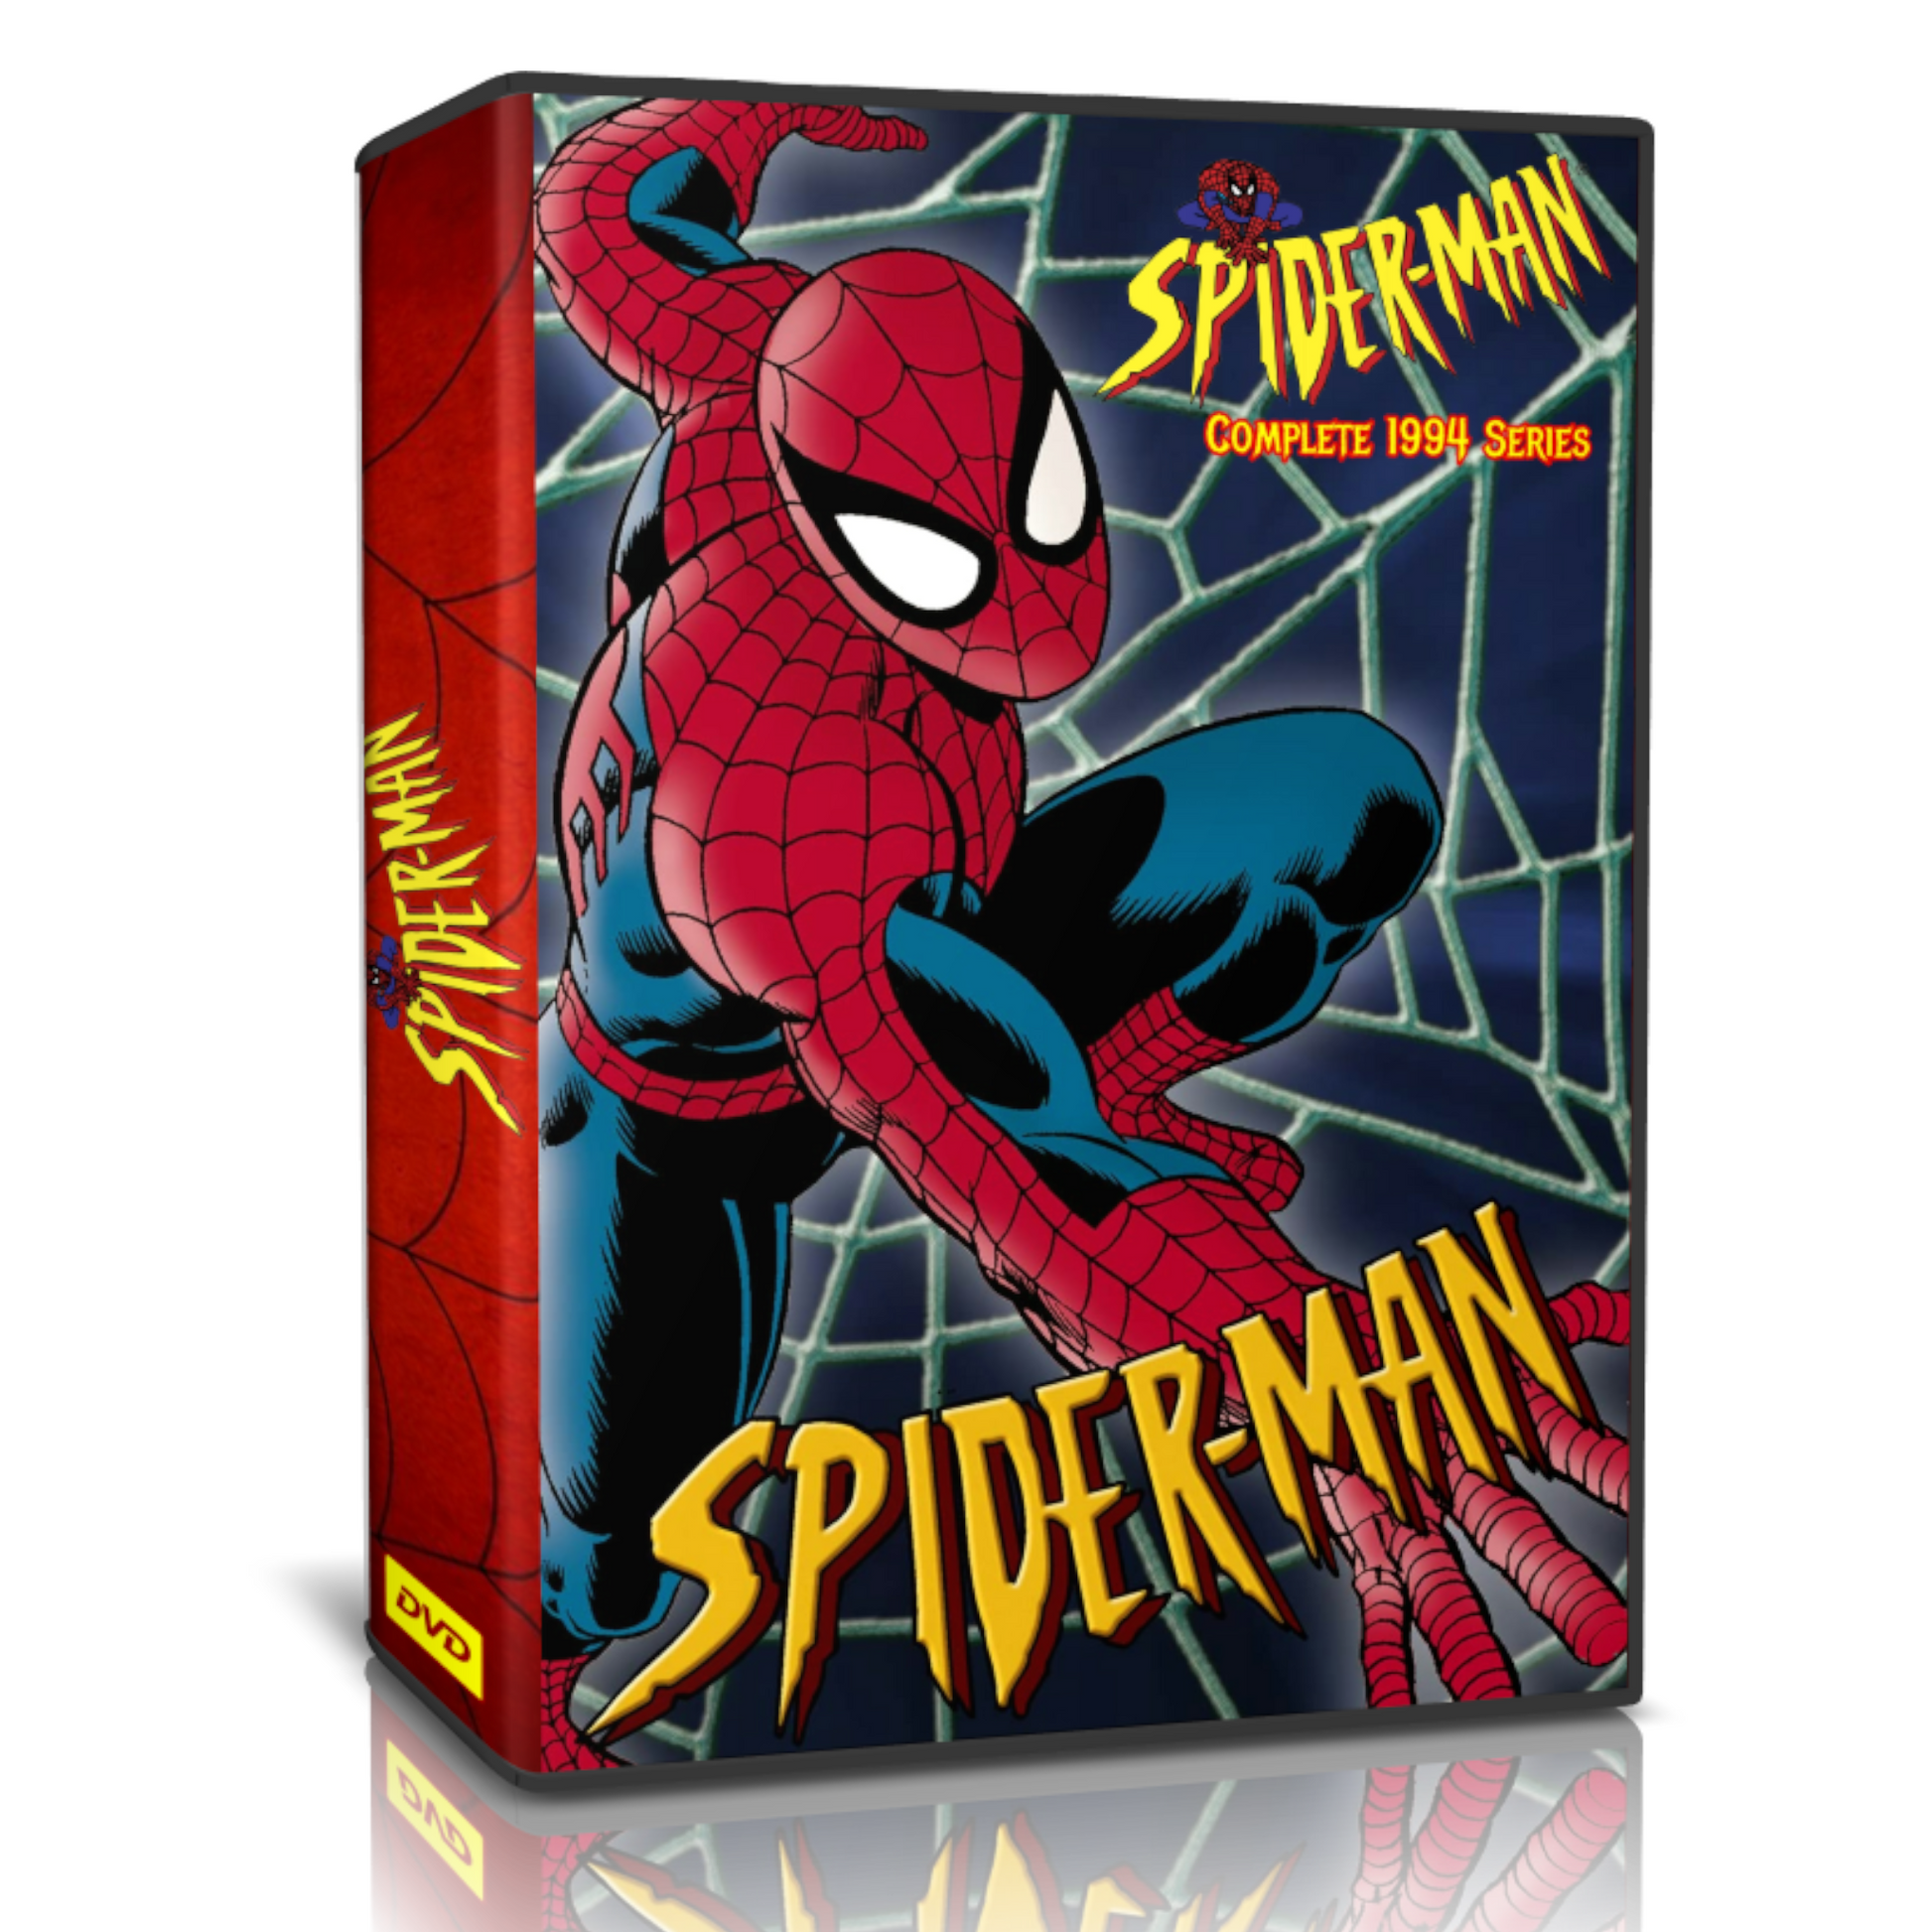 Spider-Man - The Animated Series 1994 Complete DVD Set - RetroAnimation 